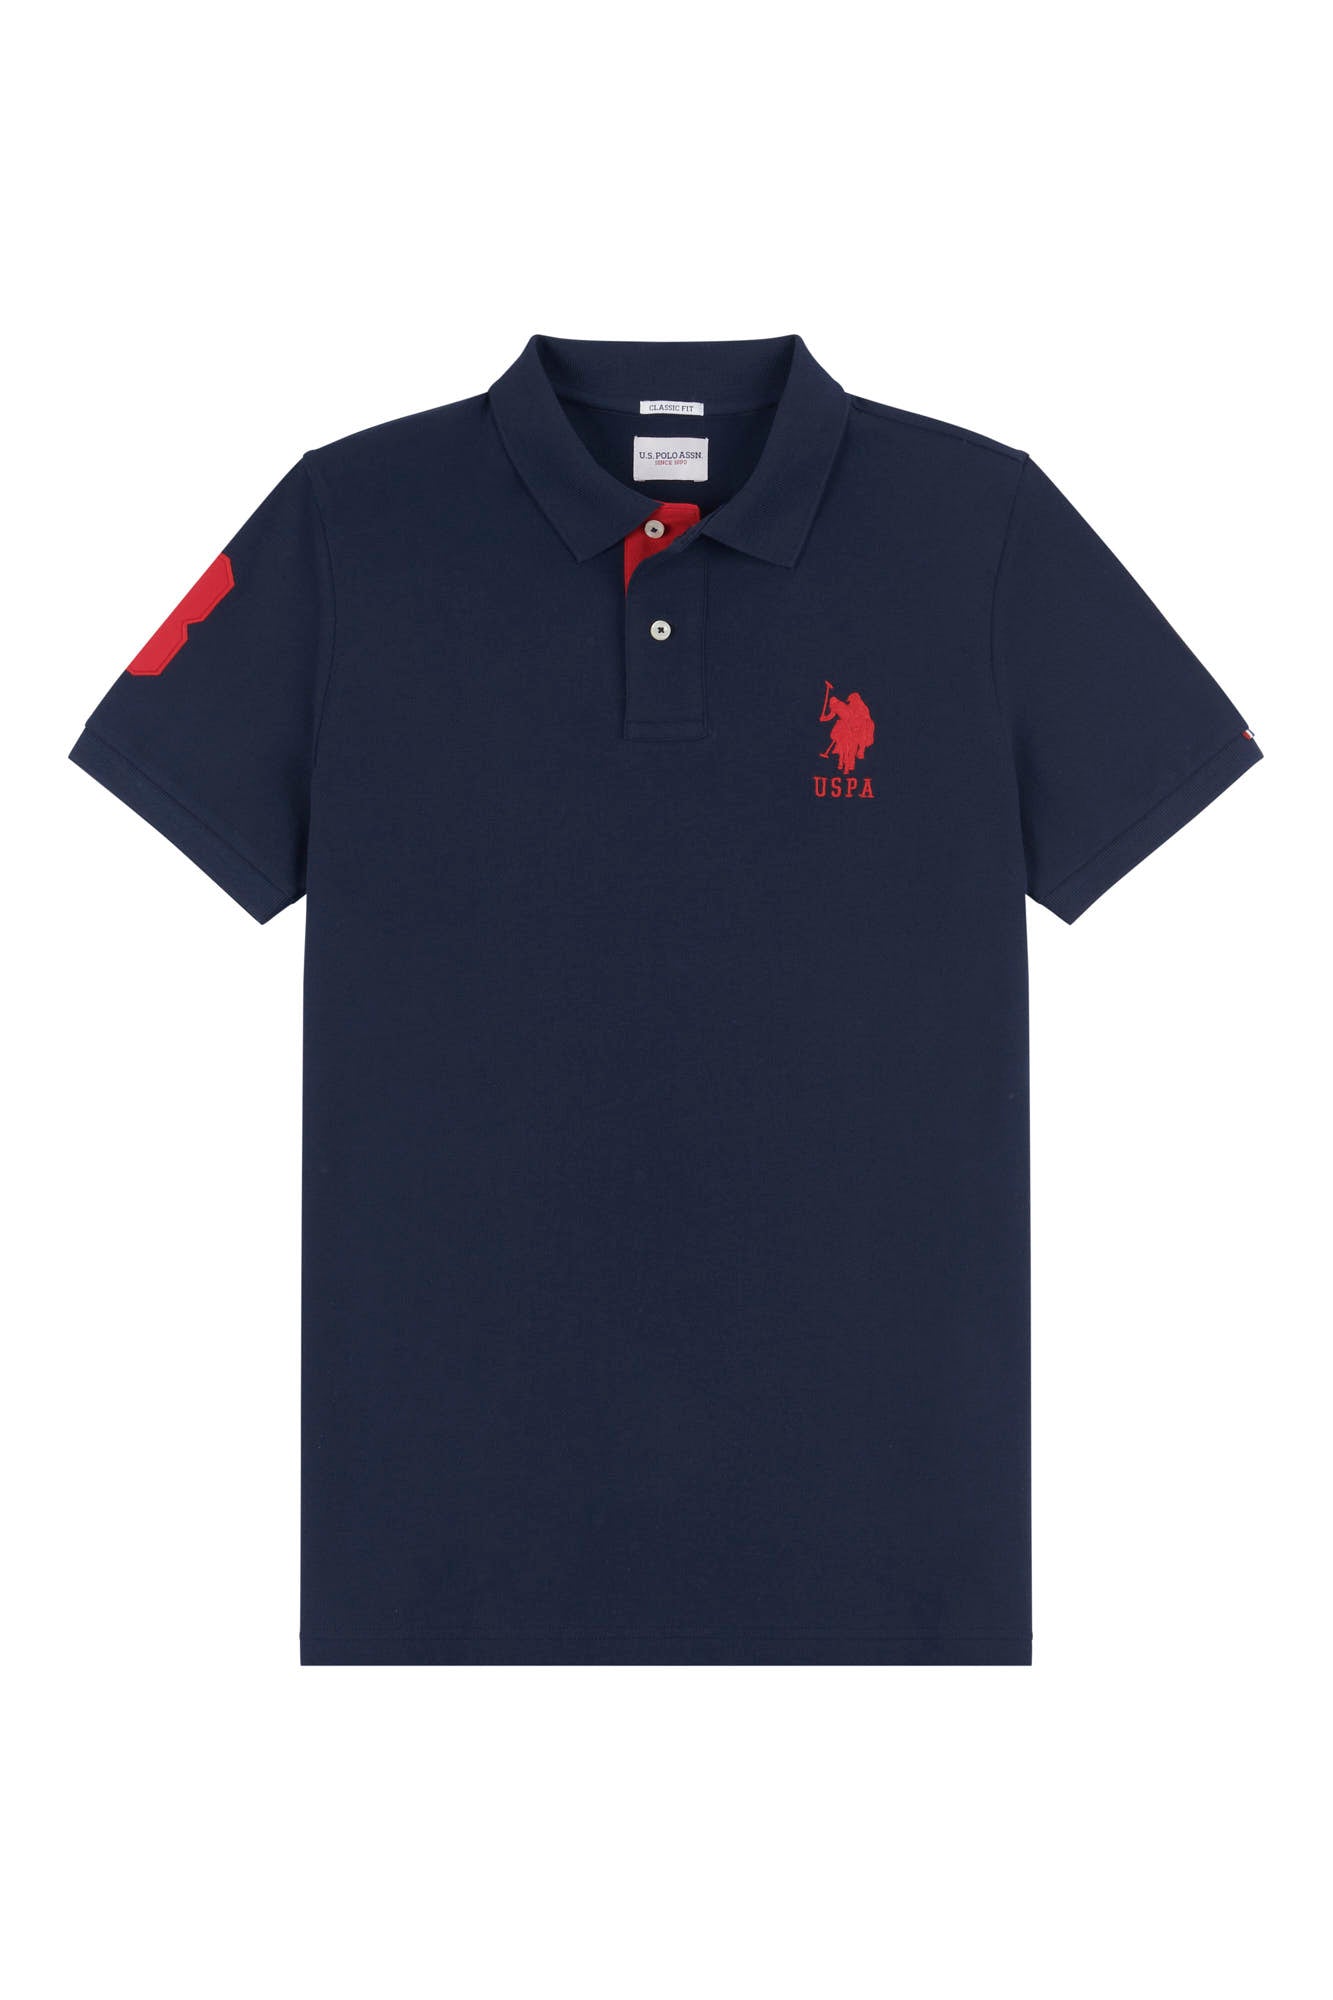 Mens Player 3 Pique Polo Shirt in Dark Sapphire Navy / Haute Red DHM